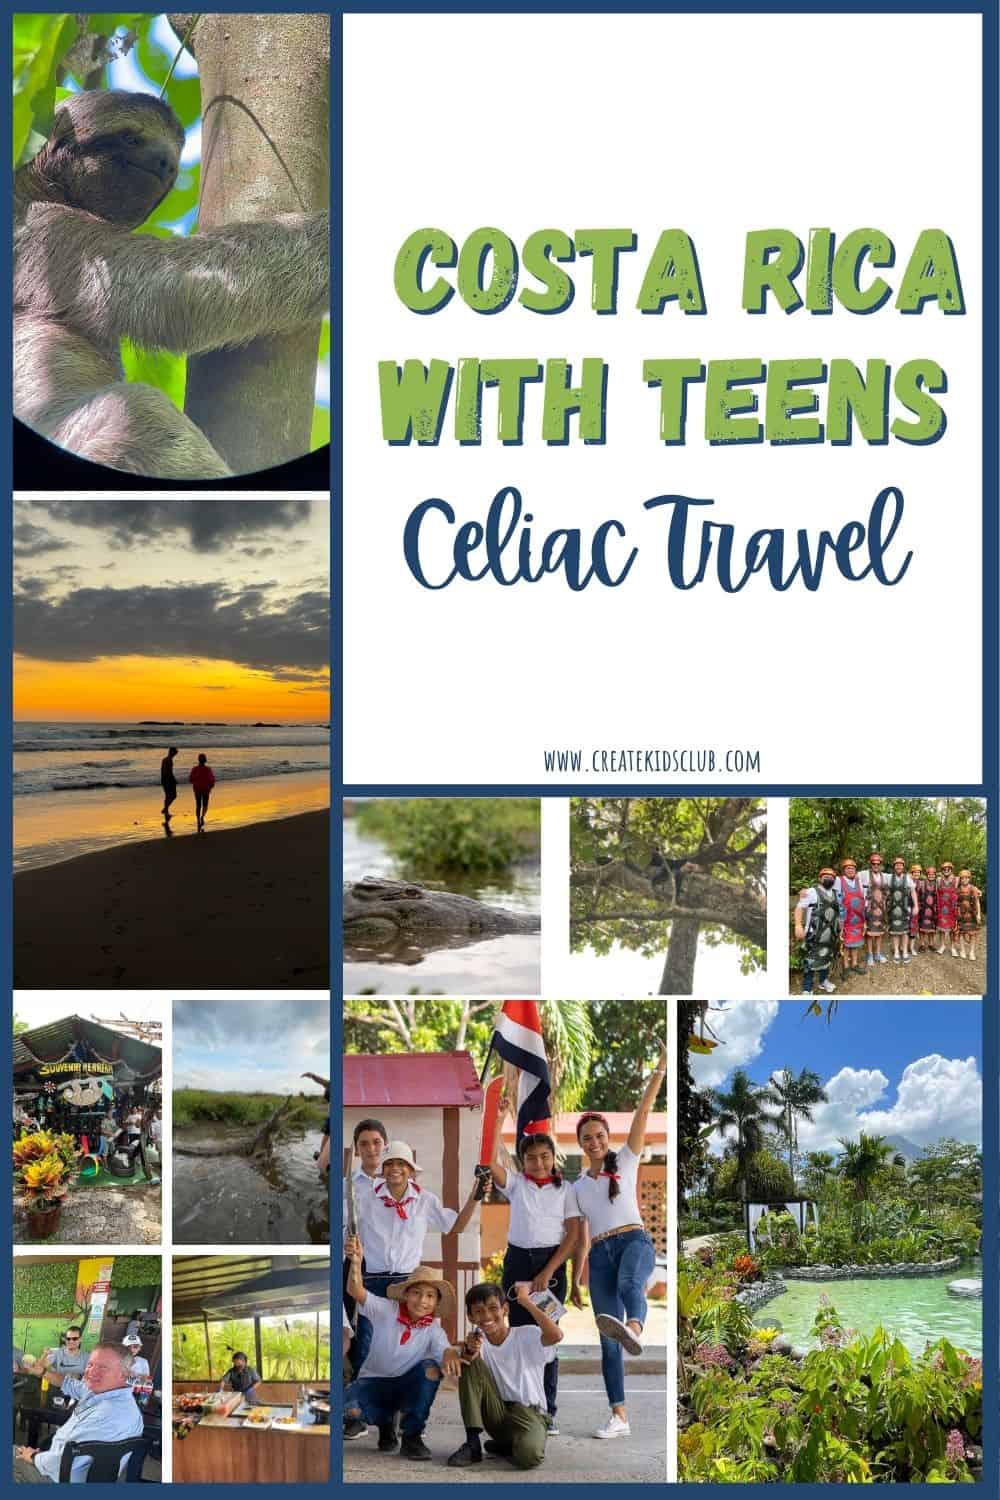 11 photos of activities to do with teens in Costa Rica.